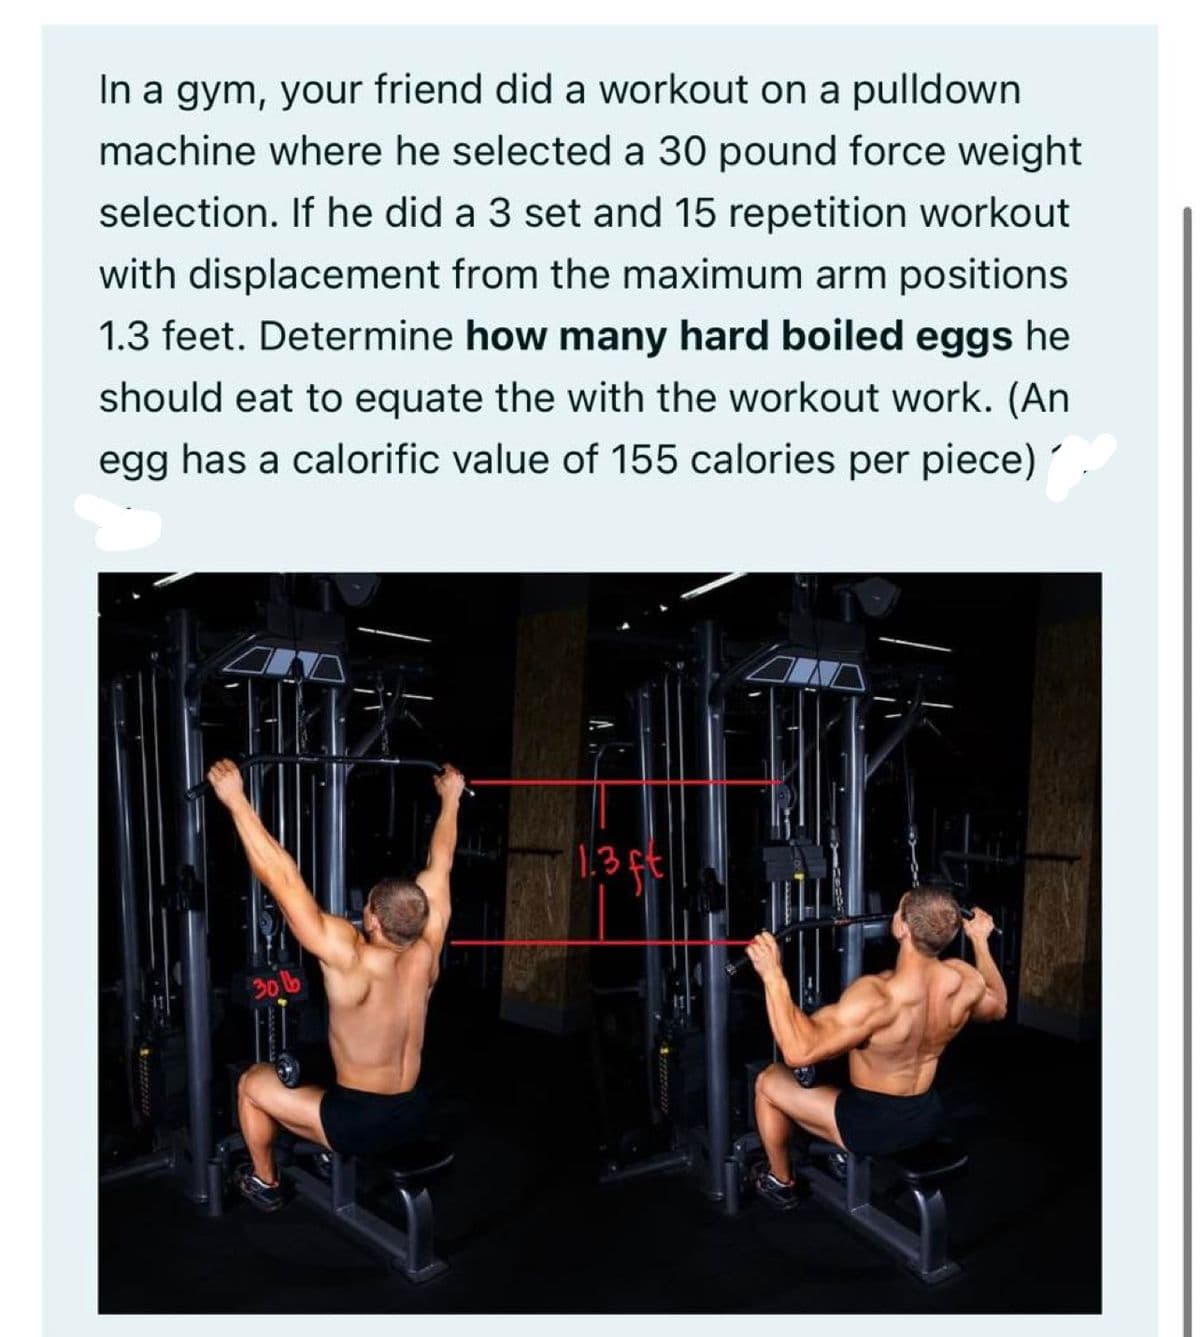 In a gym, your friend did a workout on a pulldown
machine where he selected a 30 pound force weight
selection. If he did a 3 set and 15 repetition workout
with displacement from the maximum arm positions
1.3 feet. Determine how many hard boiled eggs he
should eat to equate the with the workout work. (An
egg has a calorific value of 155 calories per piece)
30 lb
